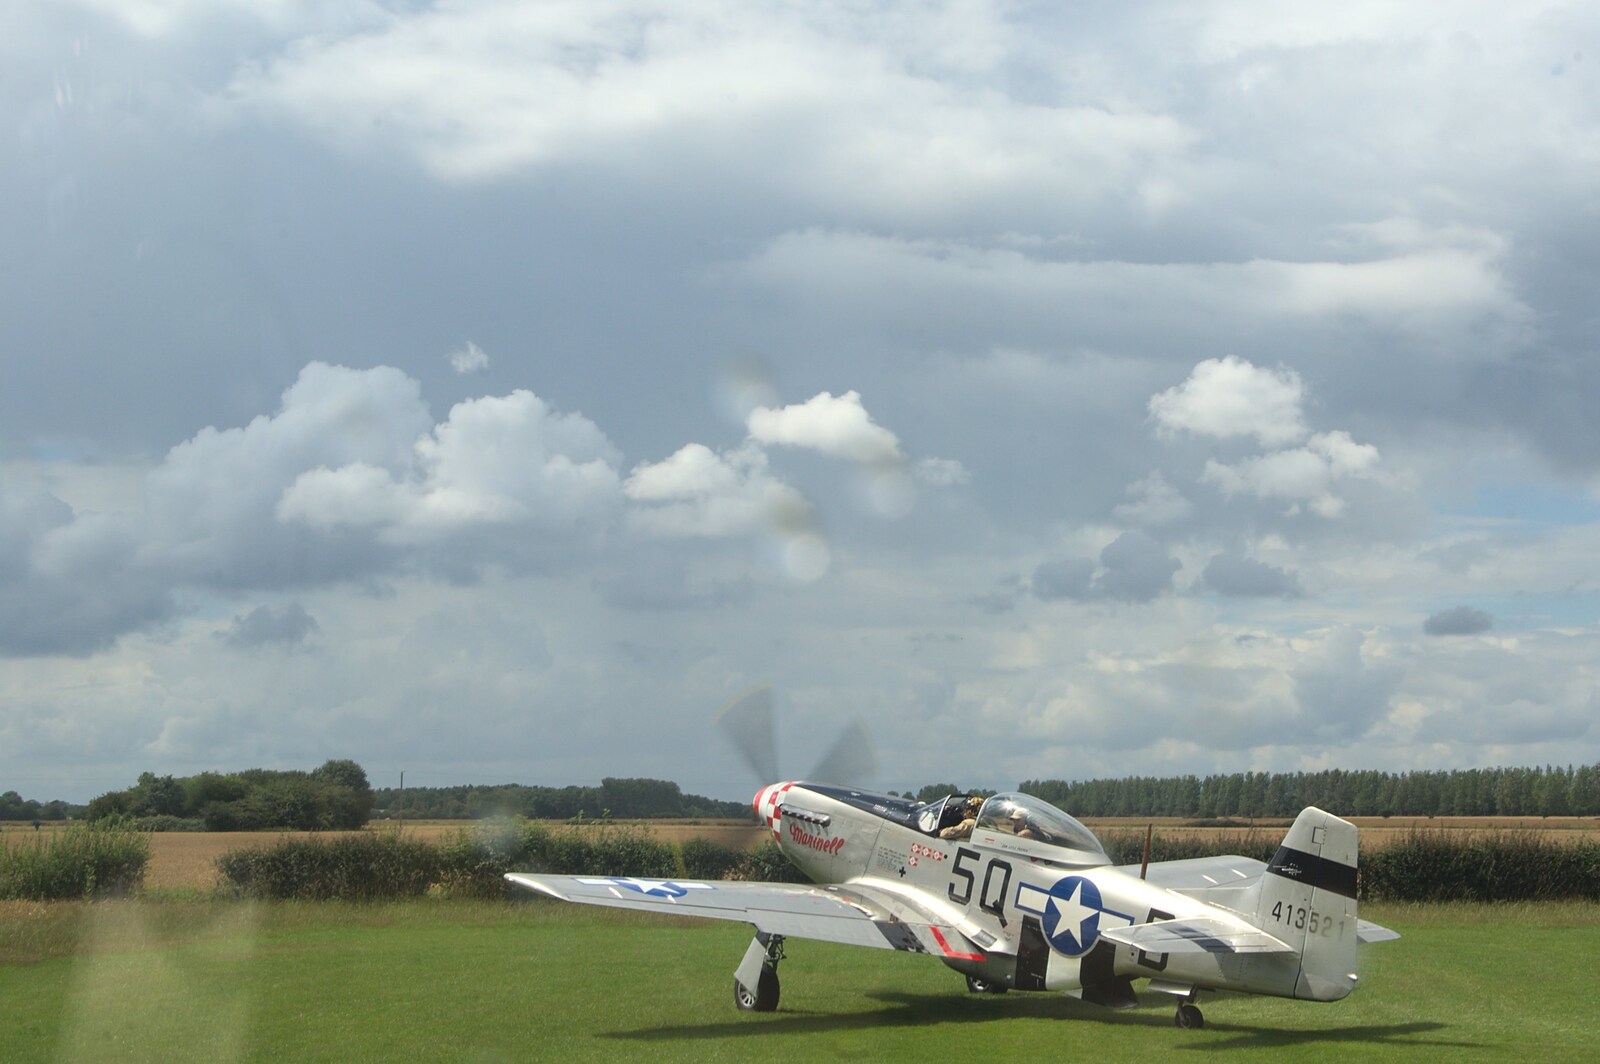 Marinell is just behind, ready for takeoff from Nosher Flies in a P-51D Mustang, Hardwick Airfield, Norfolk (and the Whole of Suffolk) - 17th July 2011